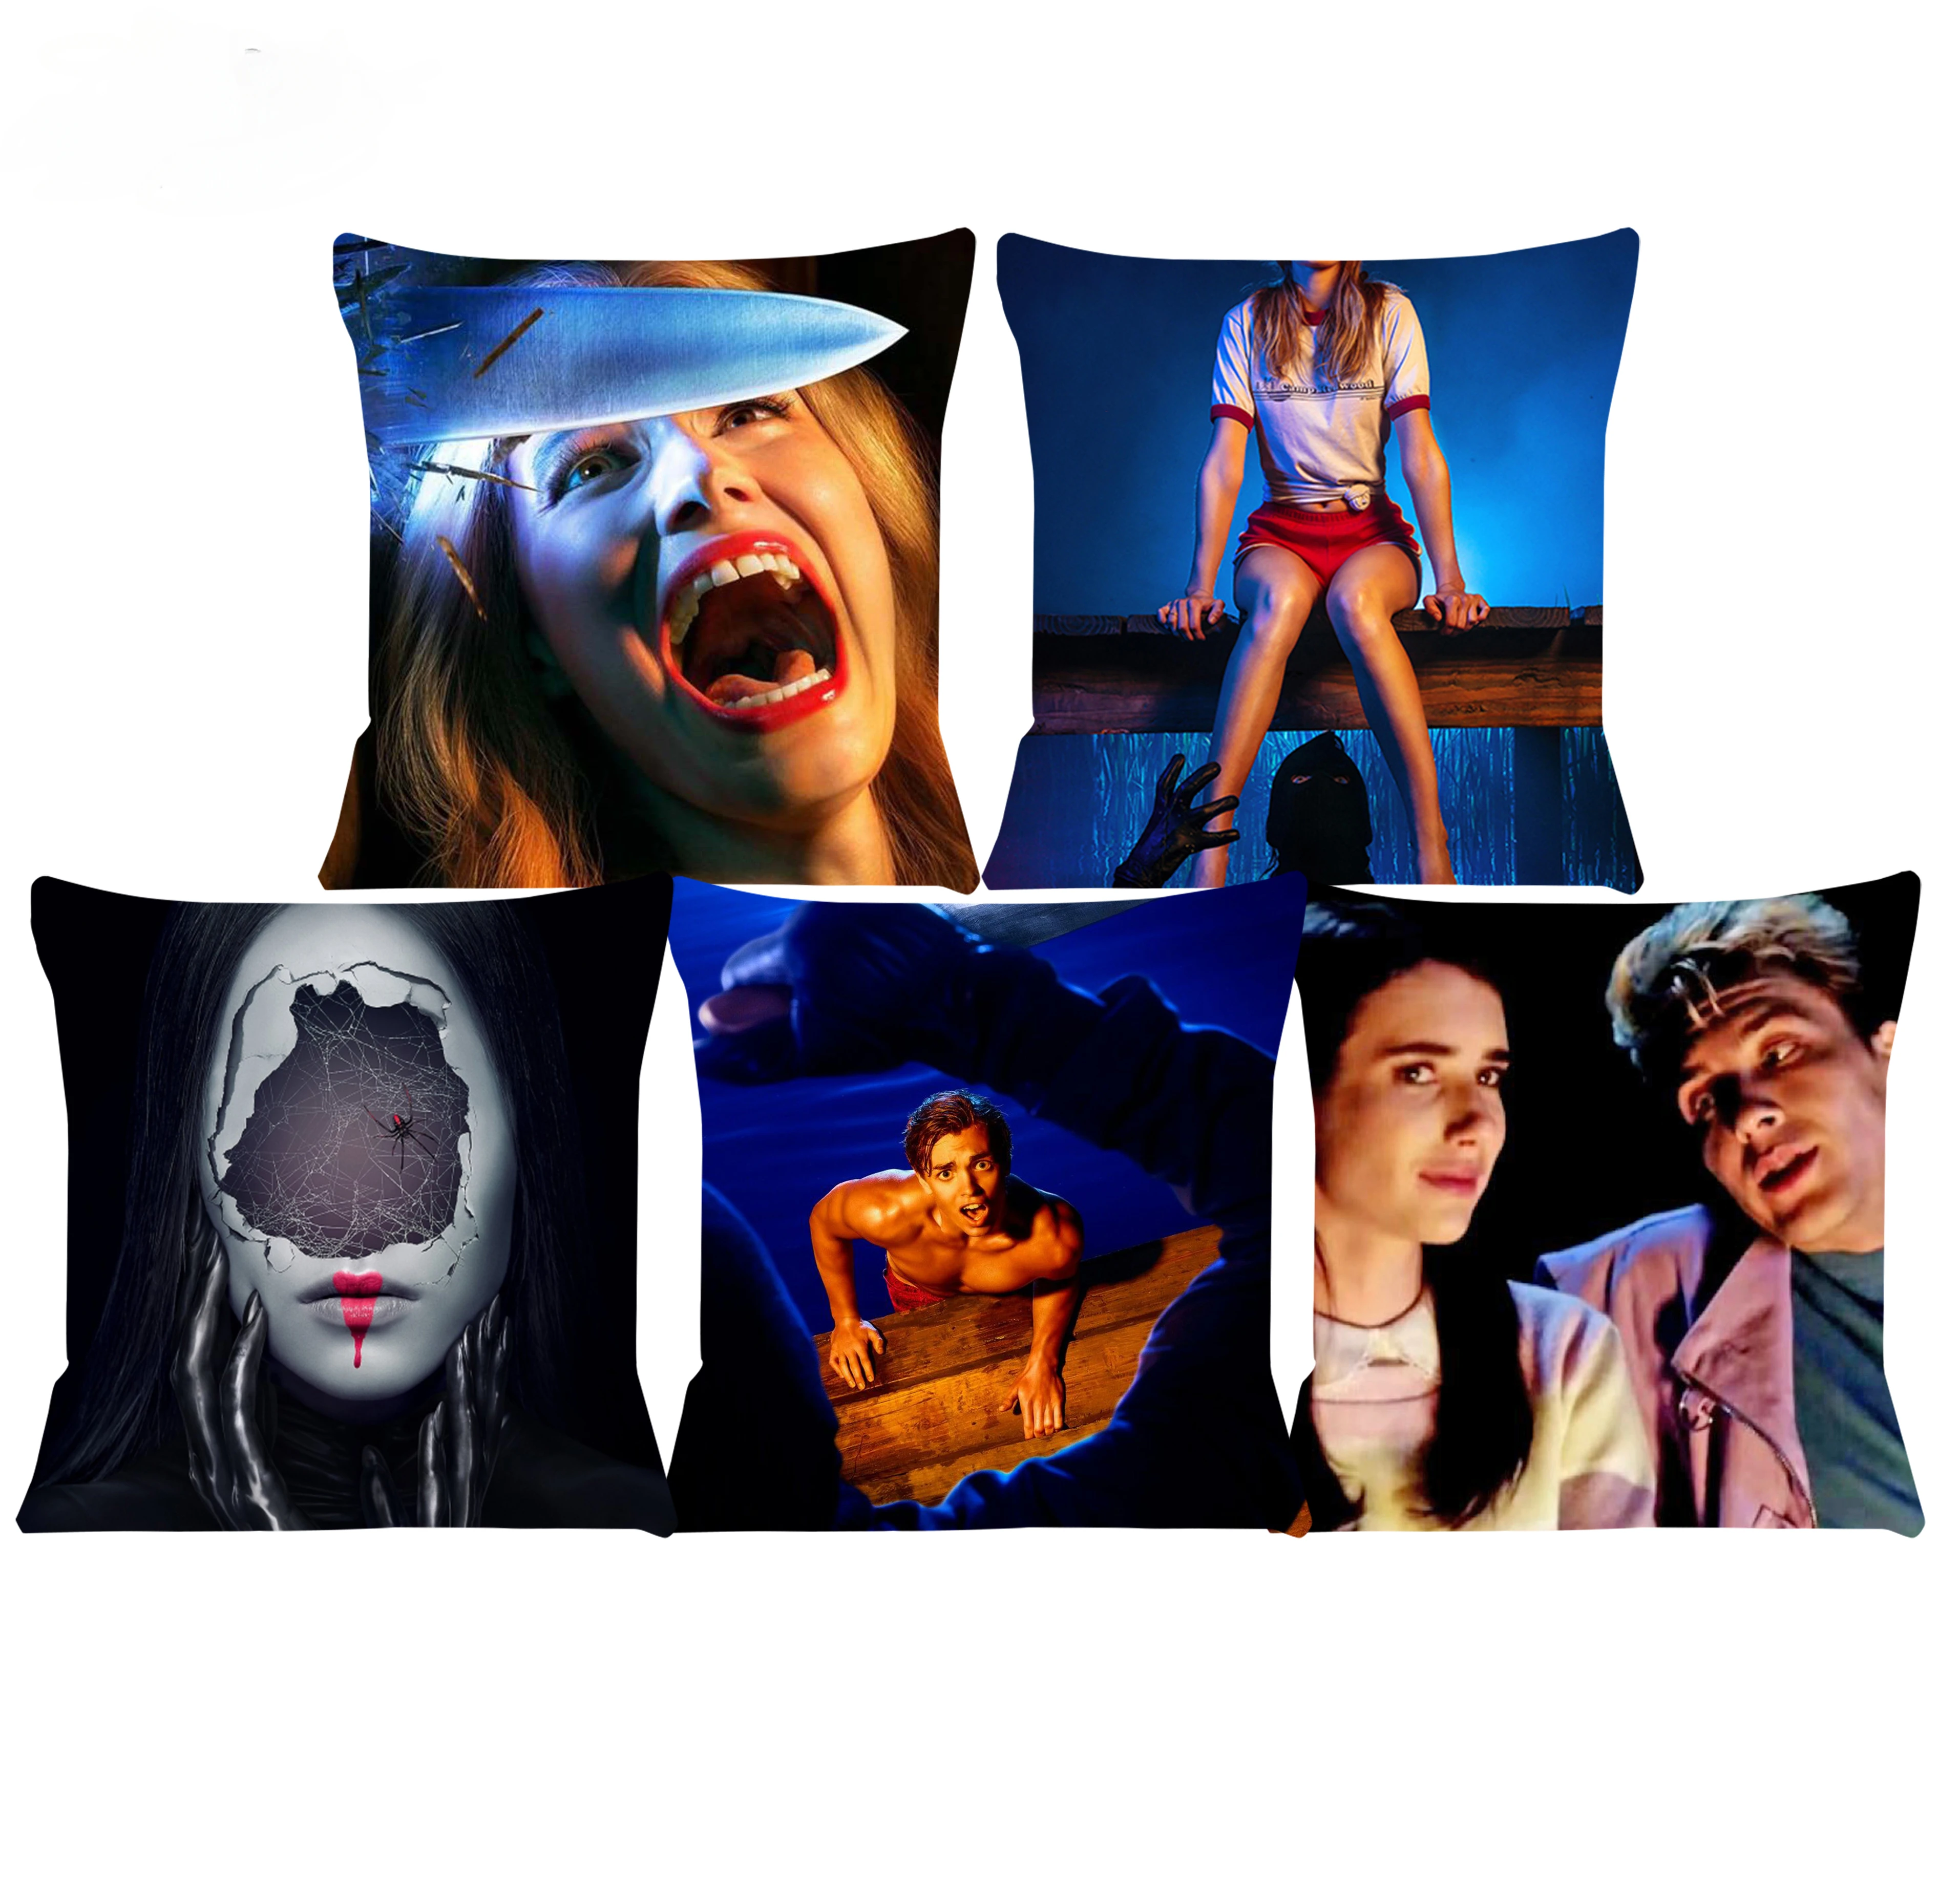 

45x45cm New American Horror Movie Cushion Cover Comfortable Pillow Cases Chair Car Sofa Pillow Cover Home Decorative